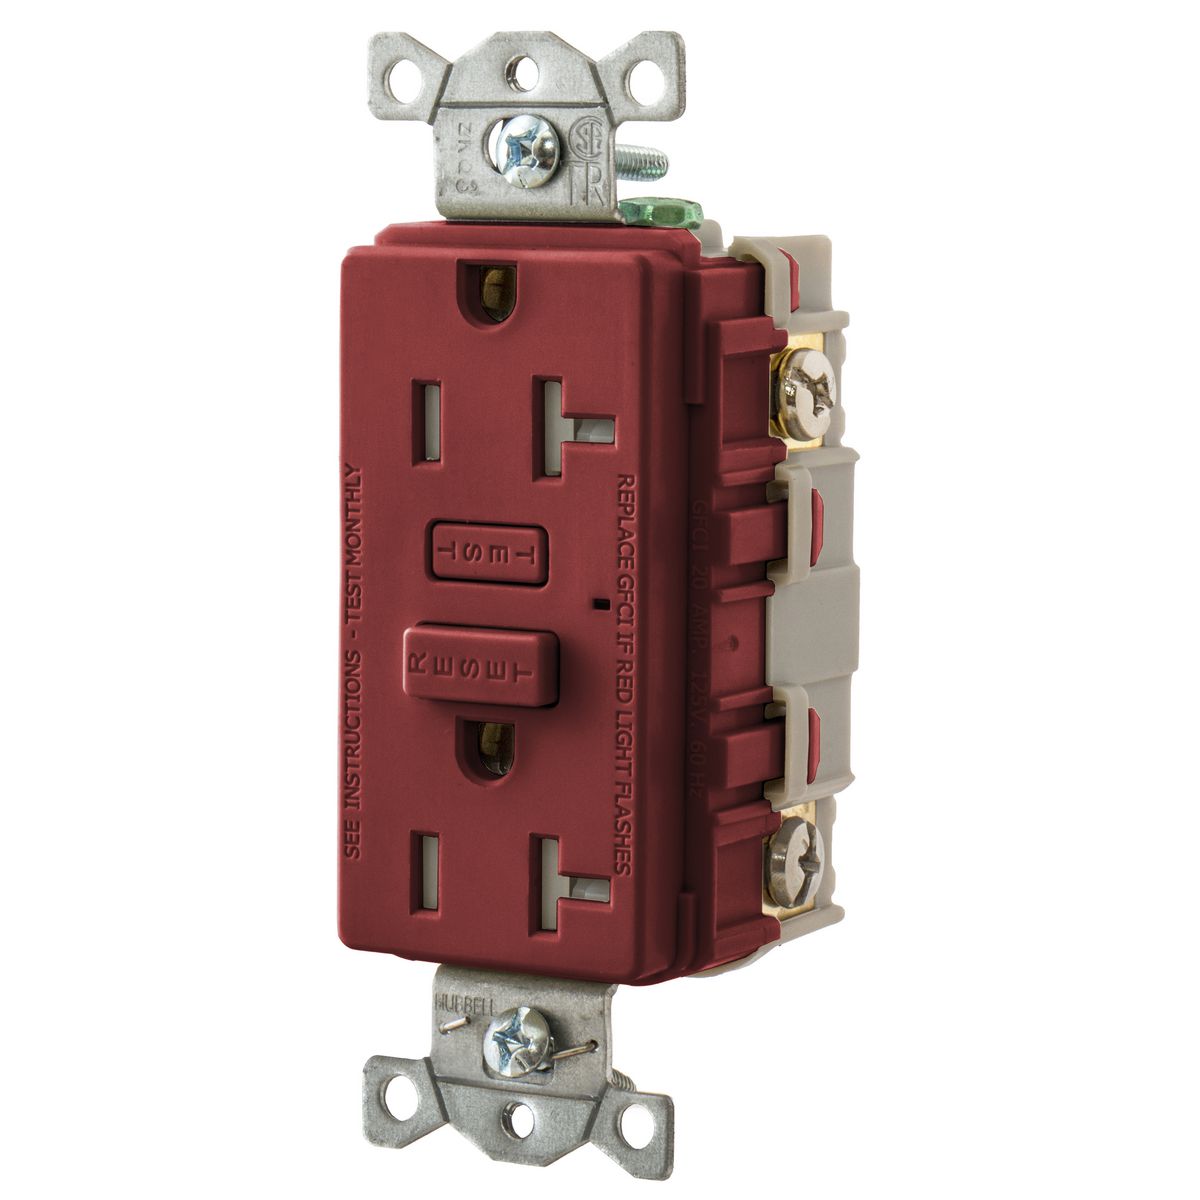 Hubbell Wiring Device Kellems, Power Protective Products, GFCIReceptacle, Hubbell Pro, 20A 125V AC, 2-Pole 3-Wire Grounding, 5-20R,Red